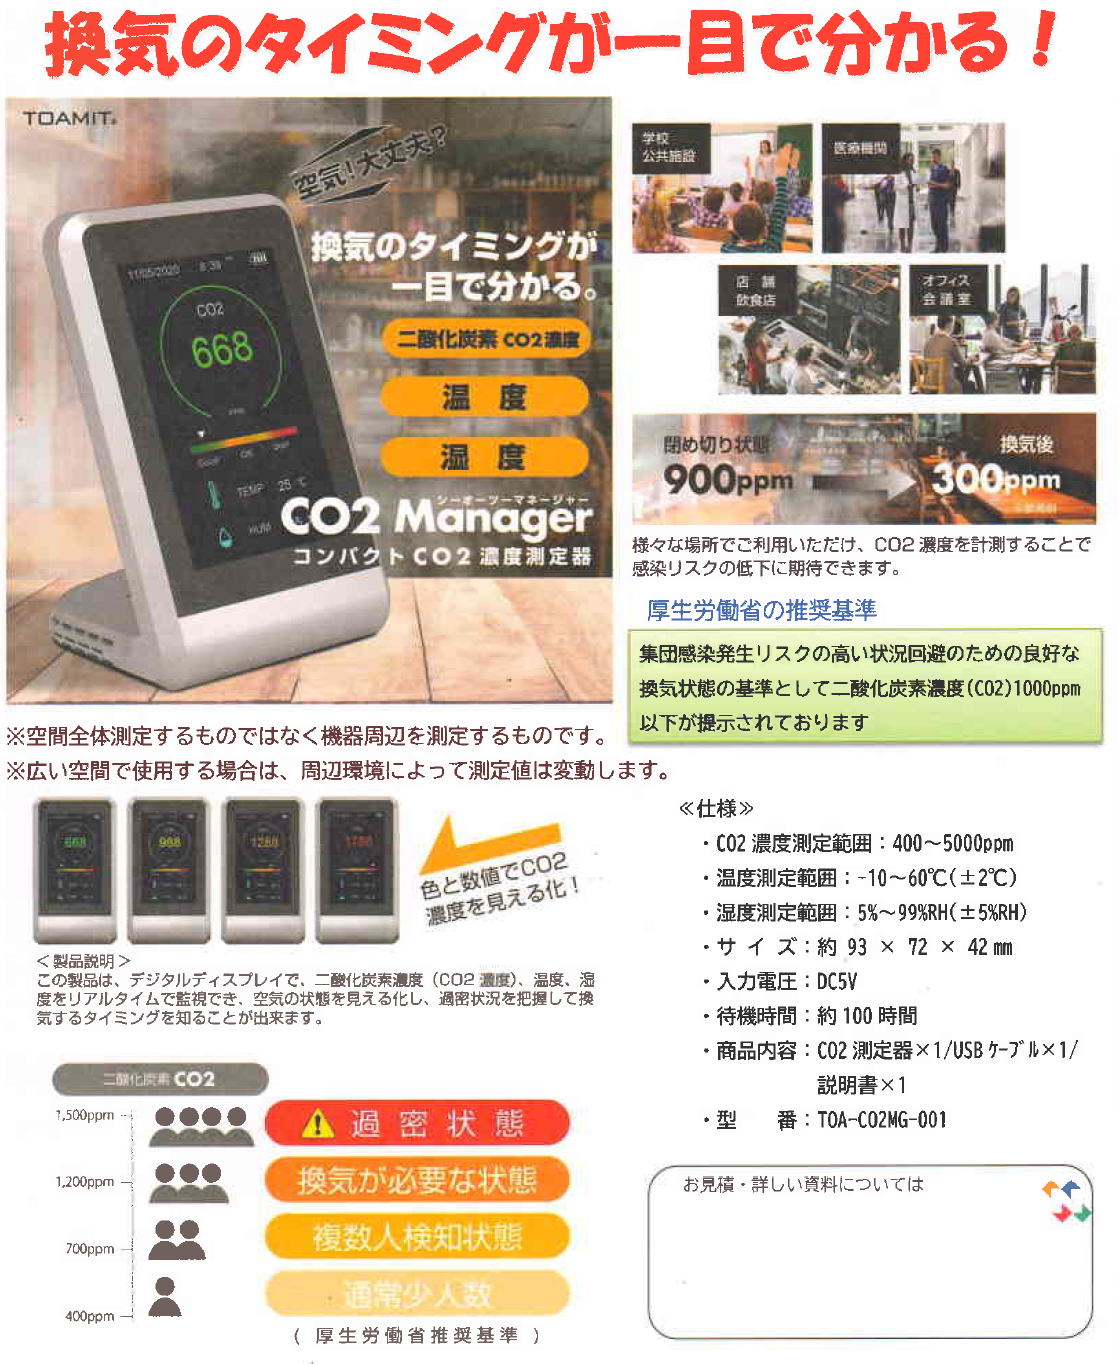 TOAMIT  TOA-CO2MG-001　CO2　Manager　コンパクトCO2濃度測定器